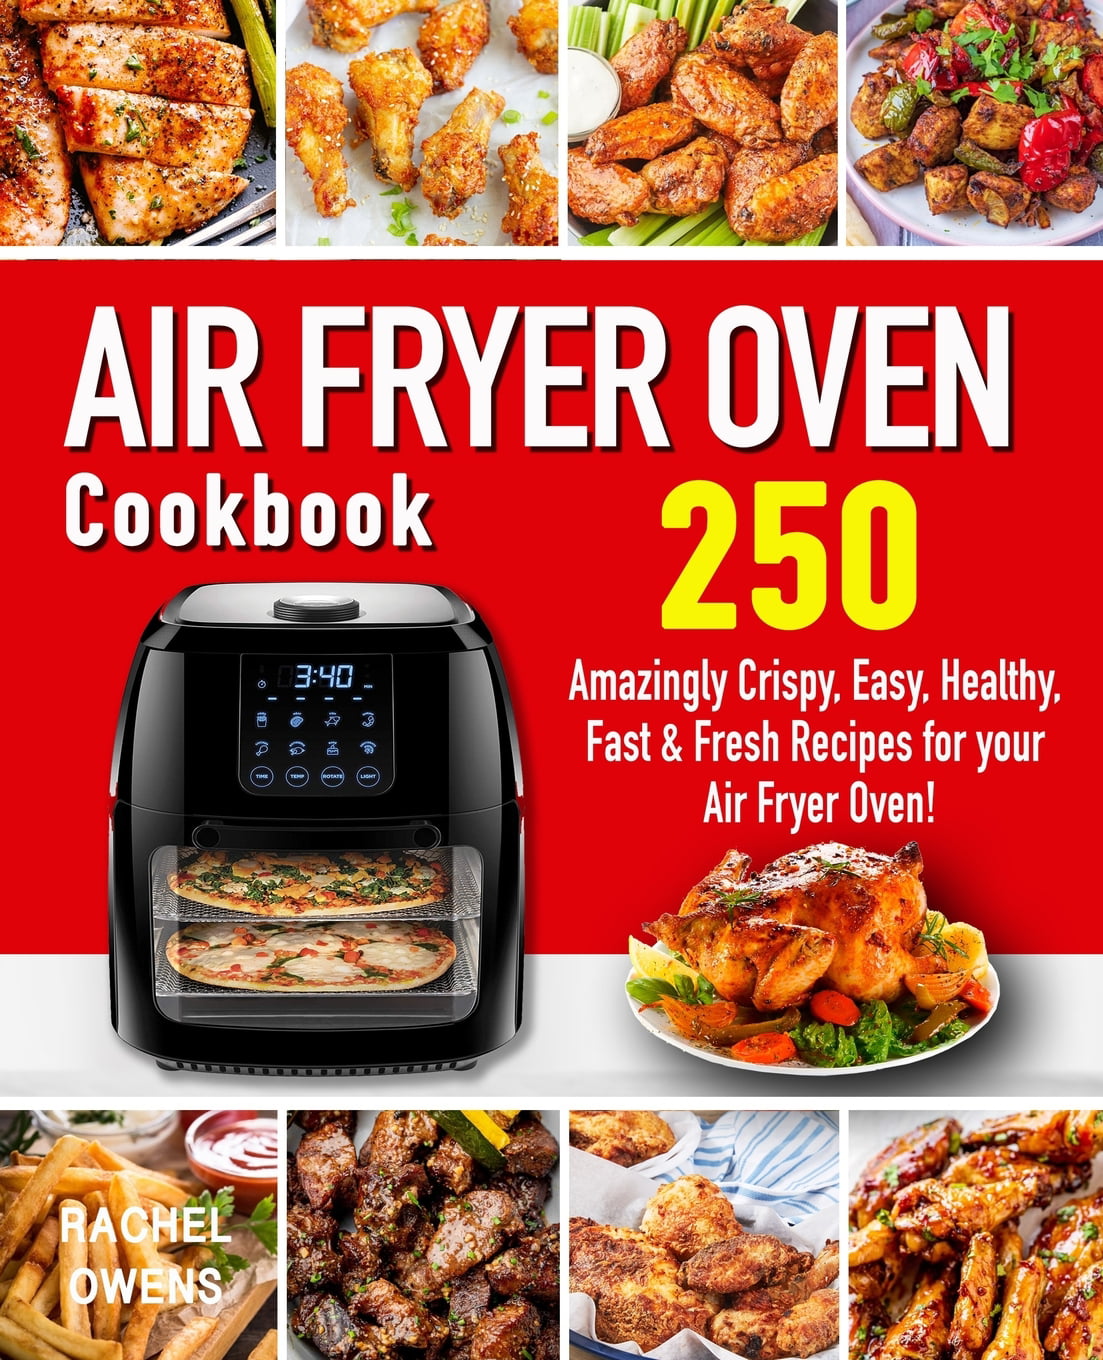 The 12 Best Lg Air Fry Oven Recipes For Beginners - Best Oven Review